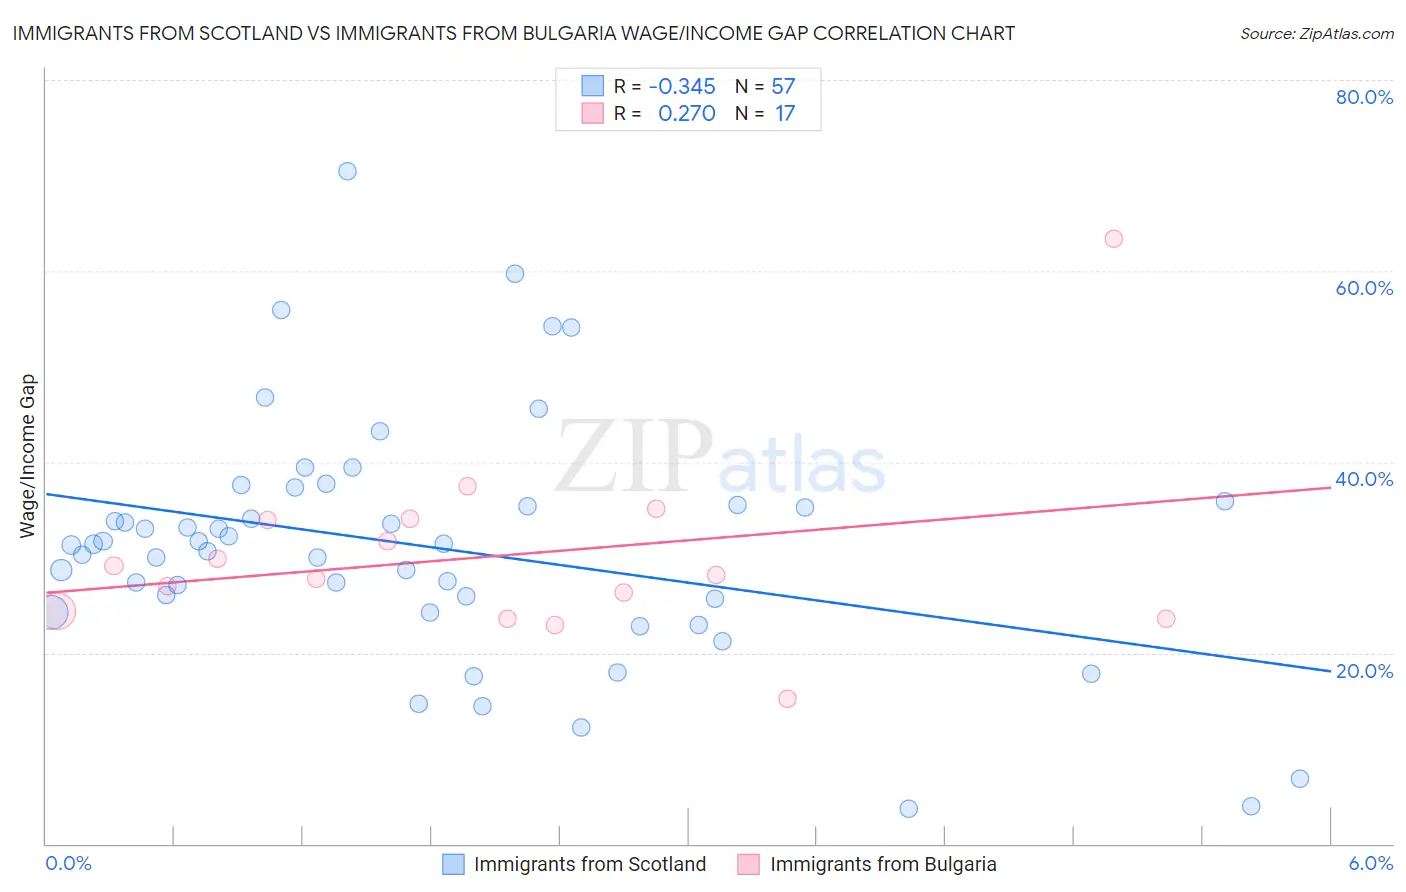 Immigrants from Scotland vs Immigrants from Bulgaria Wage/Income Gap